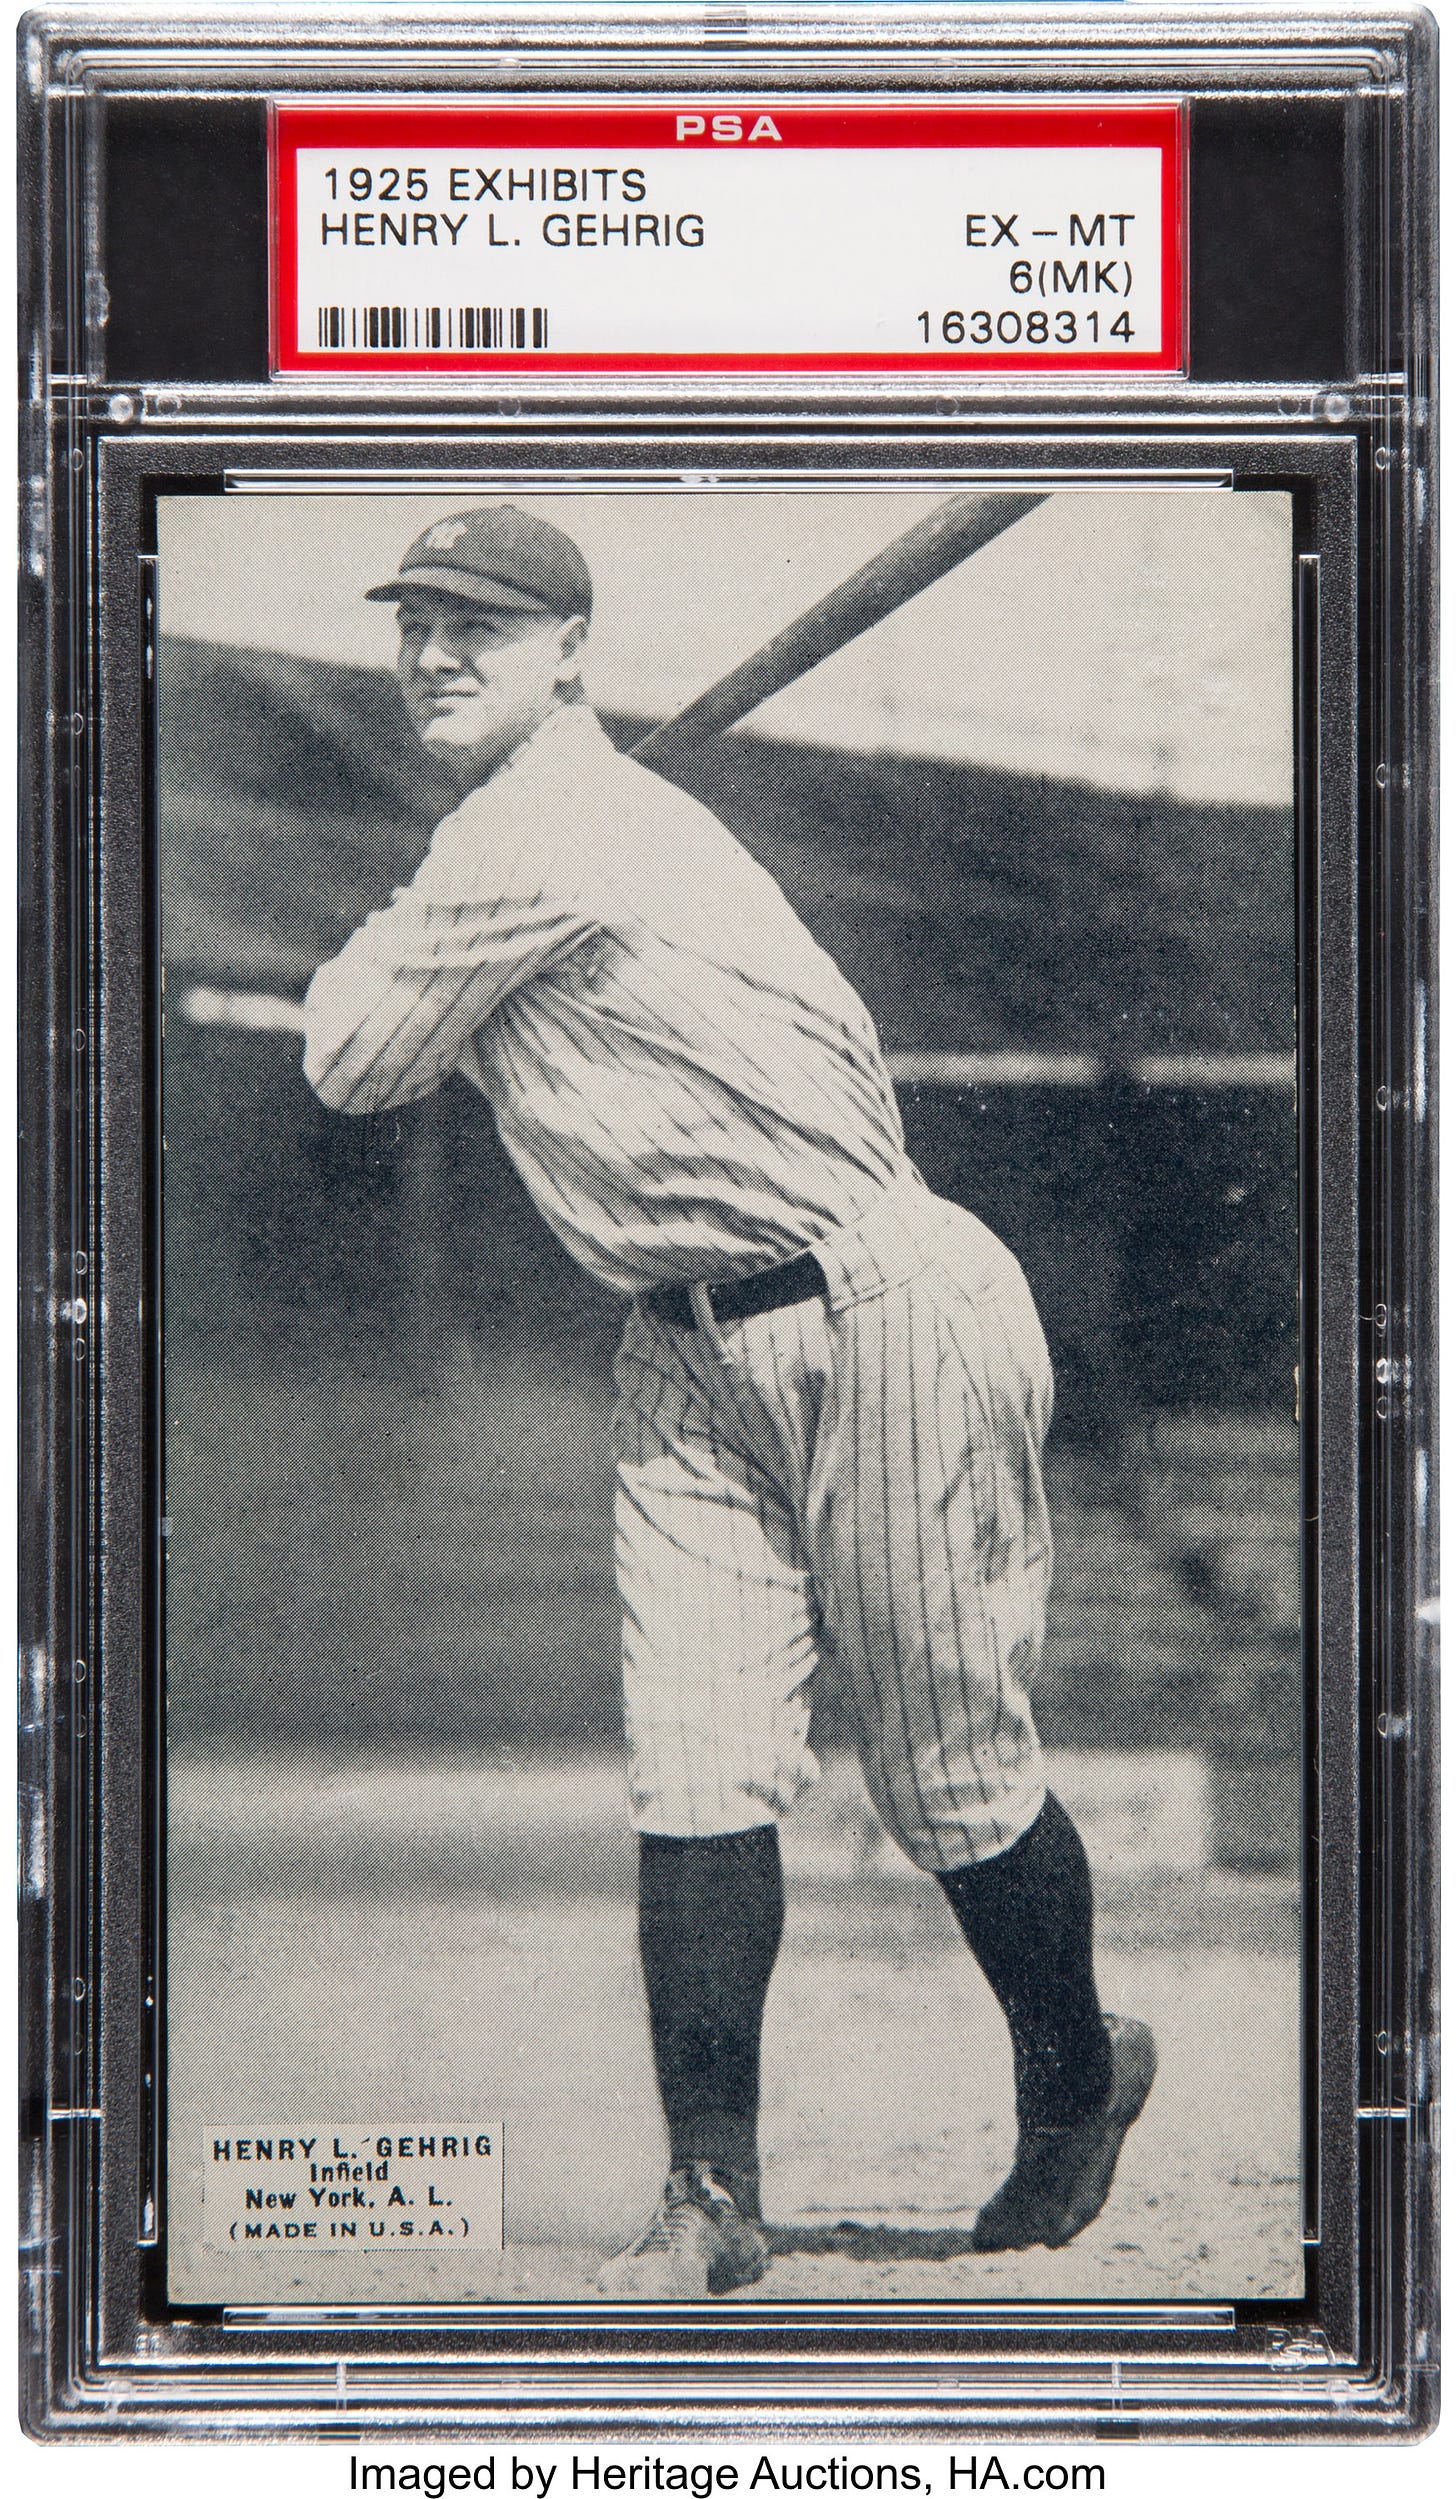 1925 Exhibits Lou Gehrig Rookie PSA EX-MT 6 (MK).... Baseball Cards | Lot  #80029 | Heritage Auctions